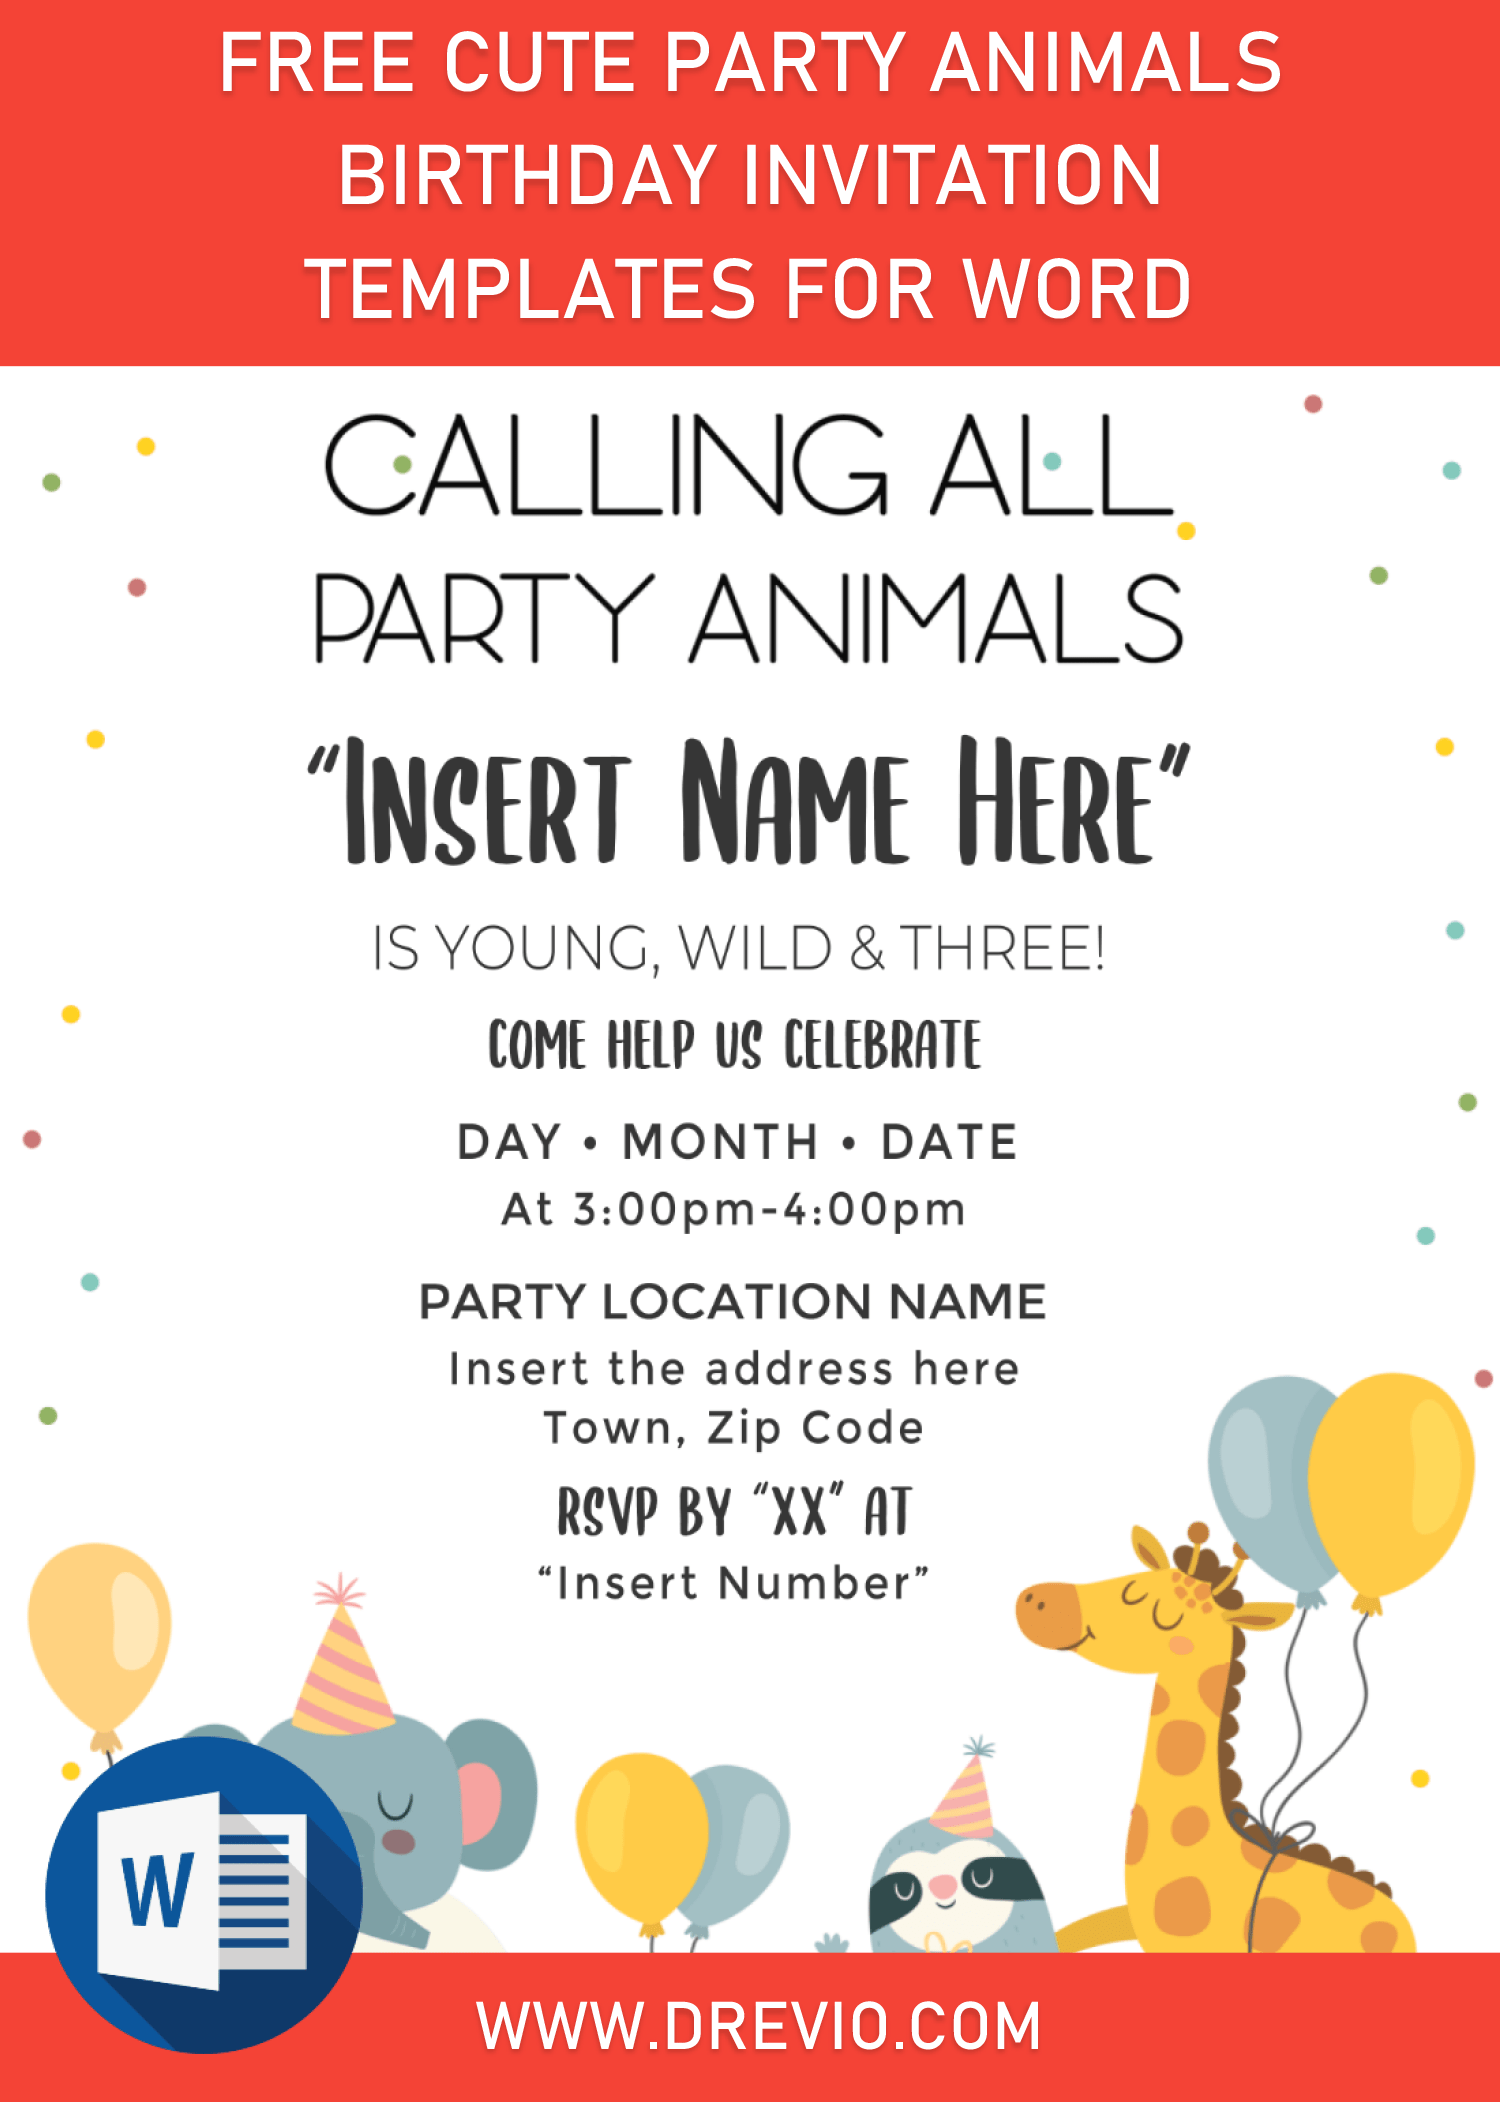 Free Cute Party Animals Birthday Invitation Templates For Word | Download  Hundreds FREE PRINTABLE Birthday Invitation Templates